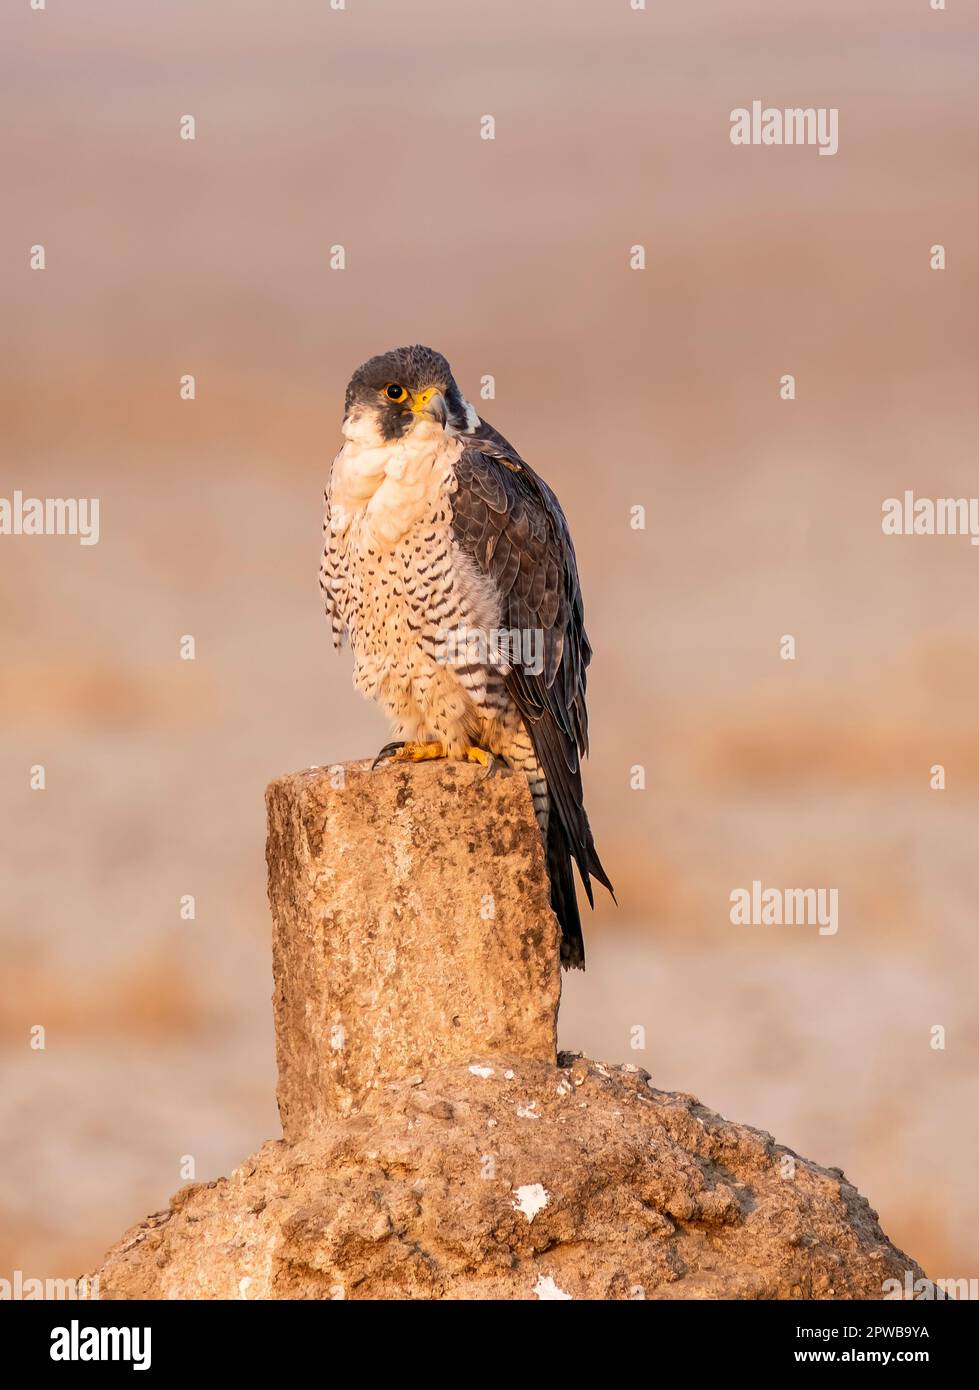 A peregrine falcon perched on a small stone inside Wildass sanctuary in little rann of kutch in Gujarat during a safari inside the sanctuary Stock Photo